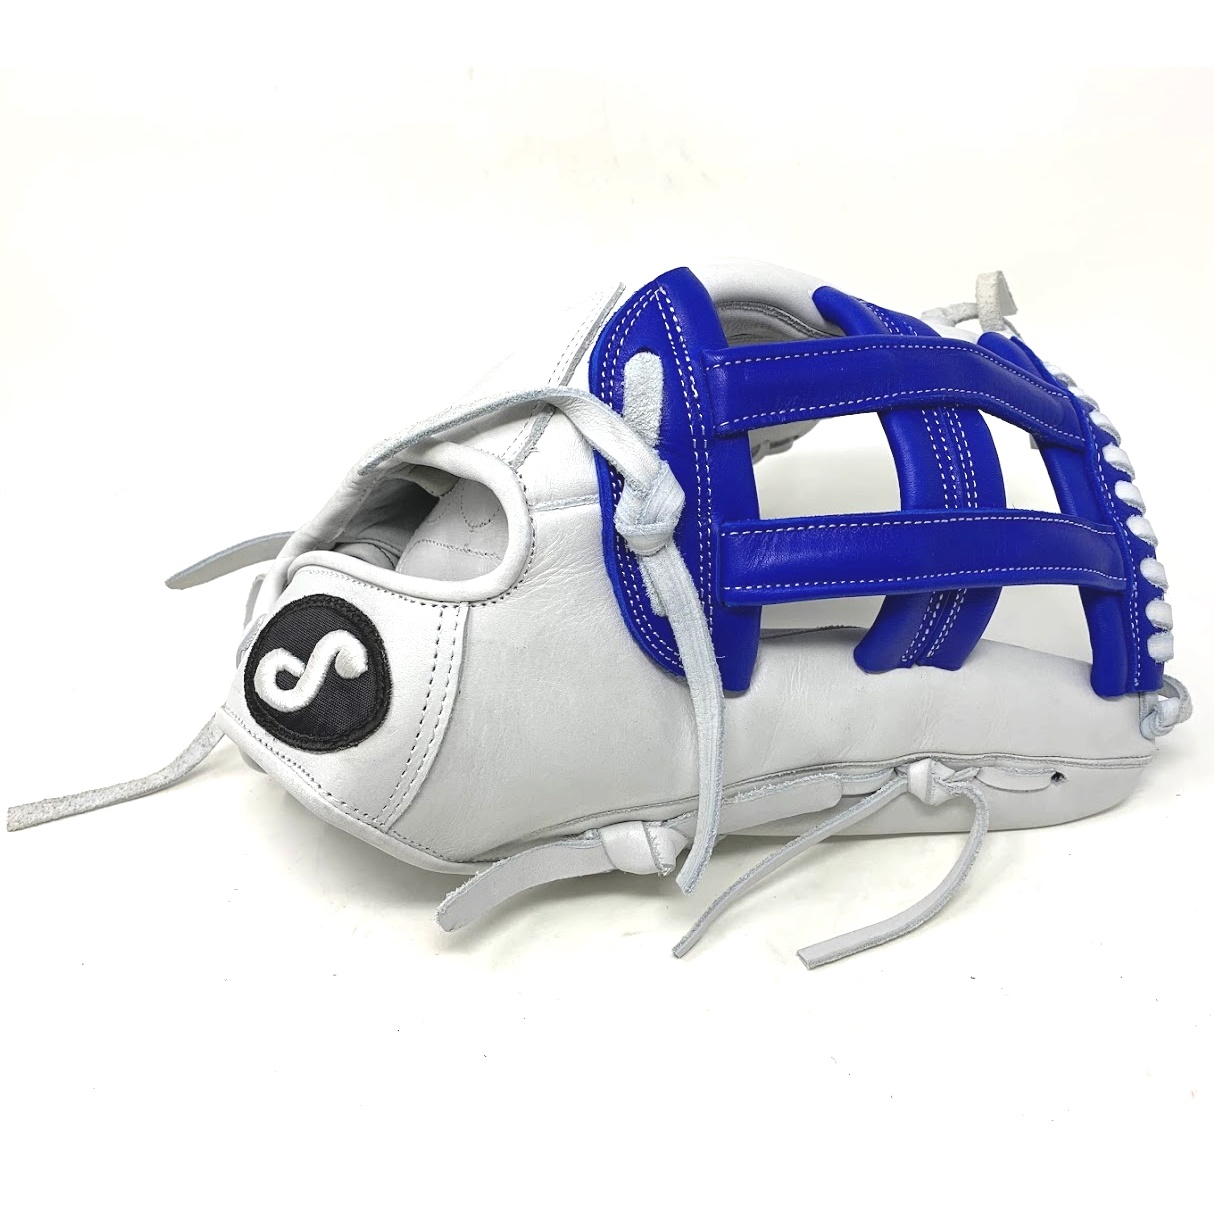 soto-white-14-inch-h-web-slow-pitch-softball-glove-right-hand-throw SS20-14-WHRY-H-RightHandThrow soto  Made in Mexico      The Soto family has been making